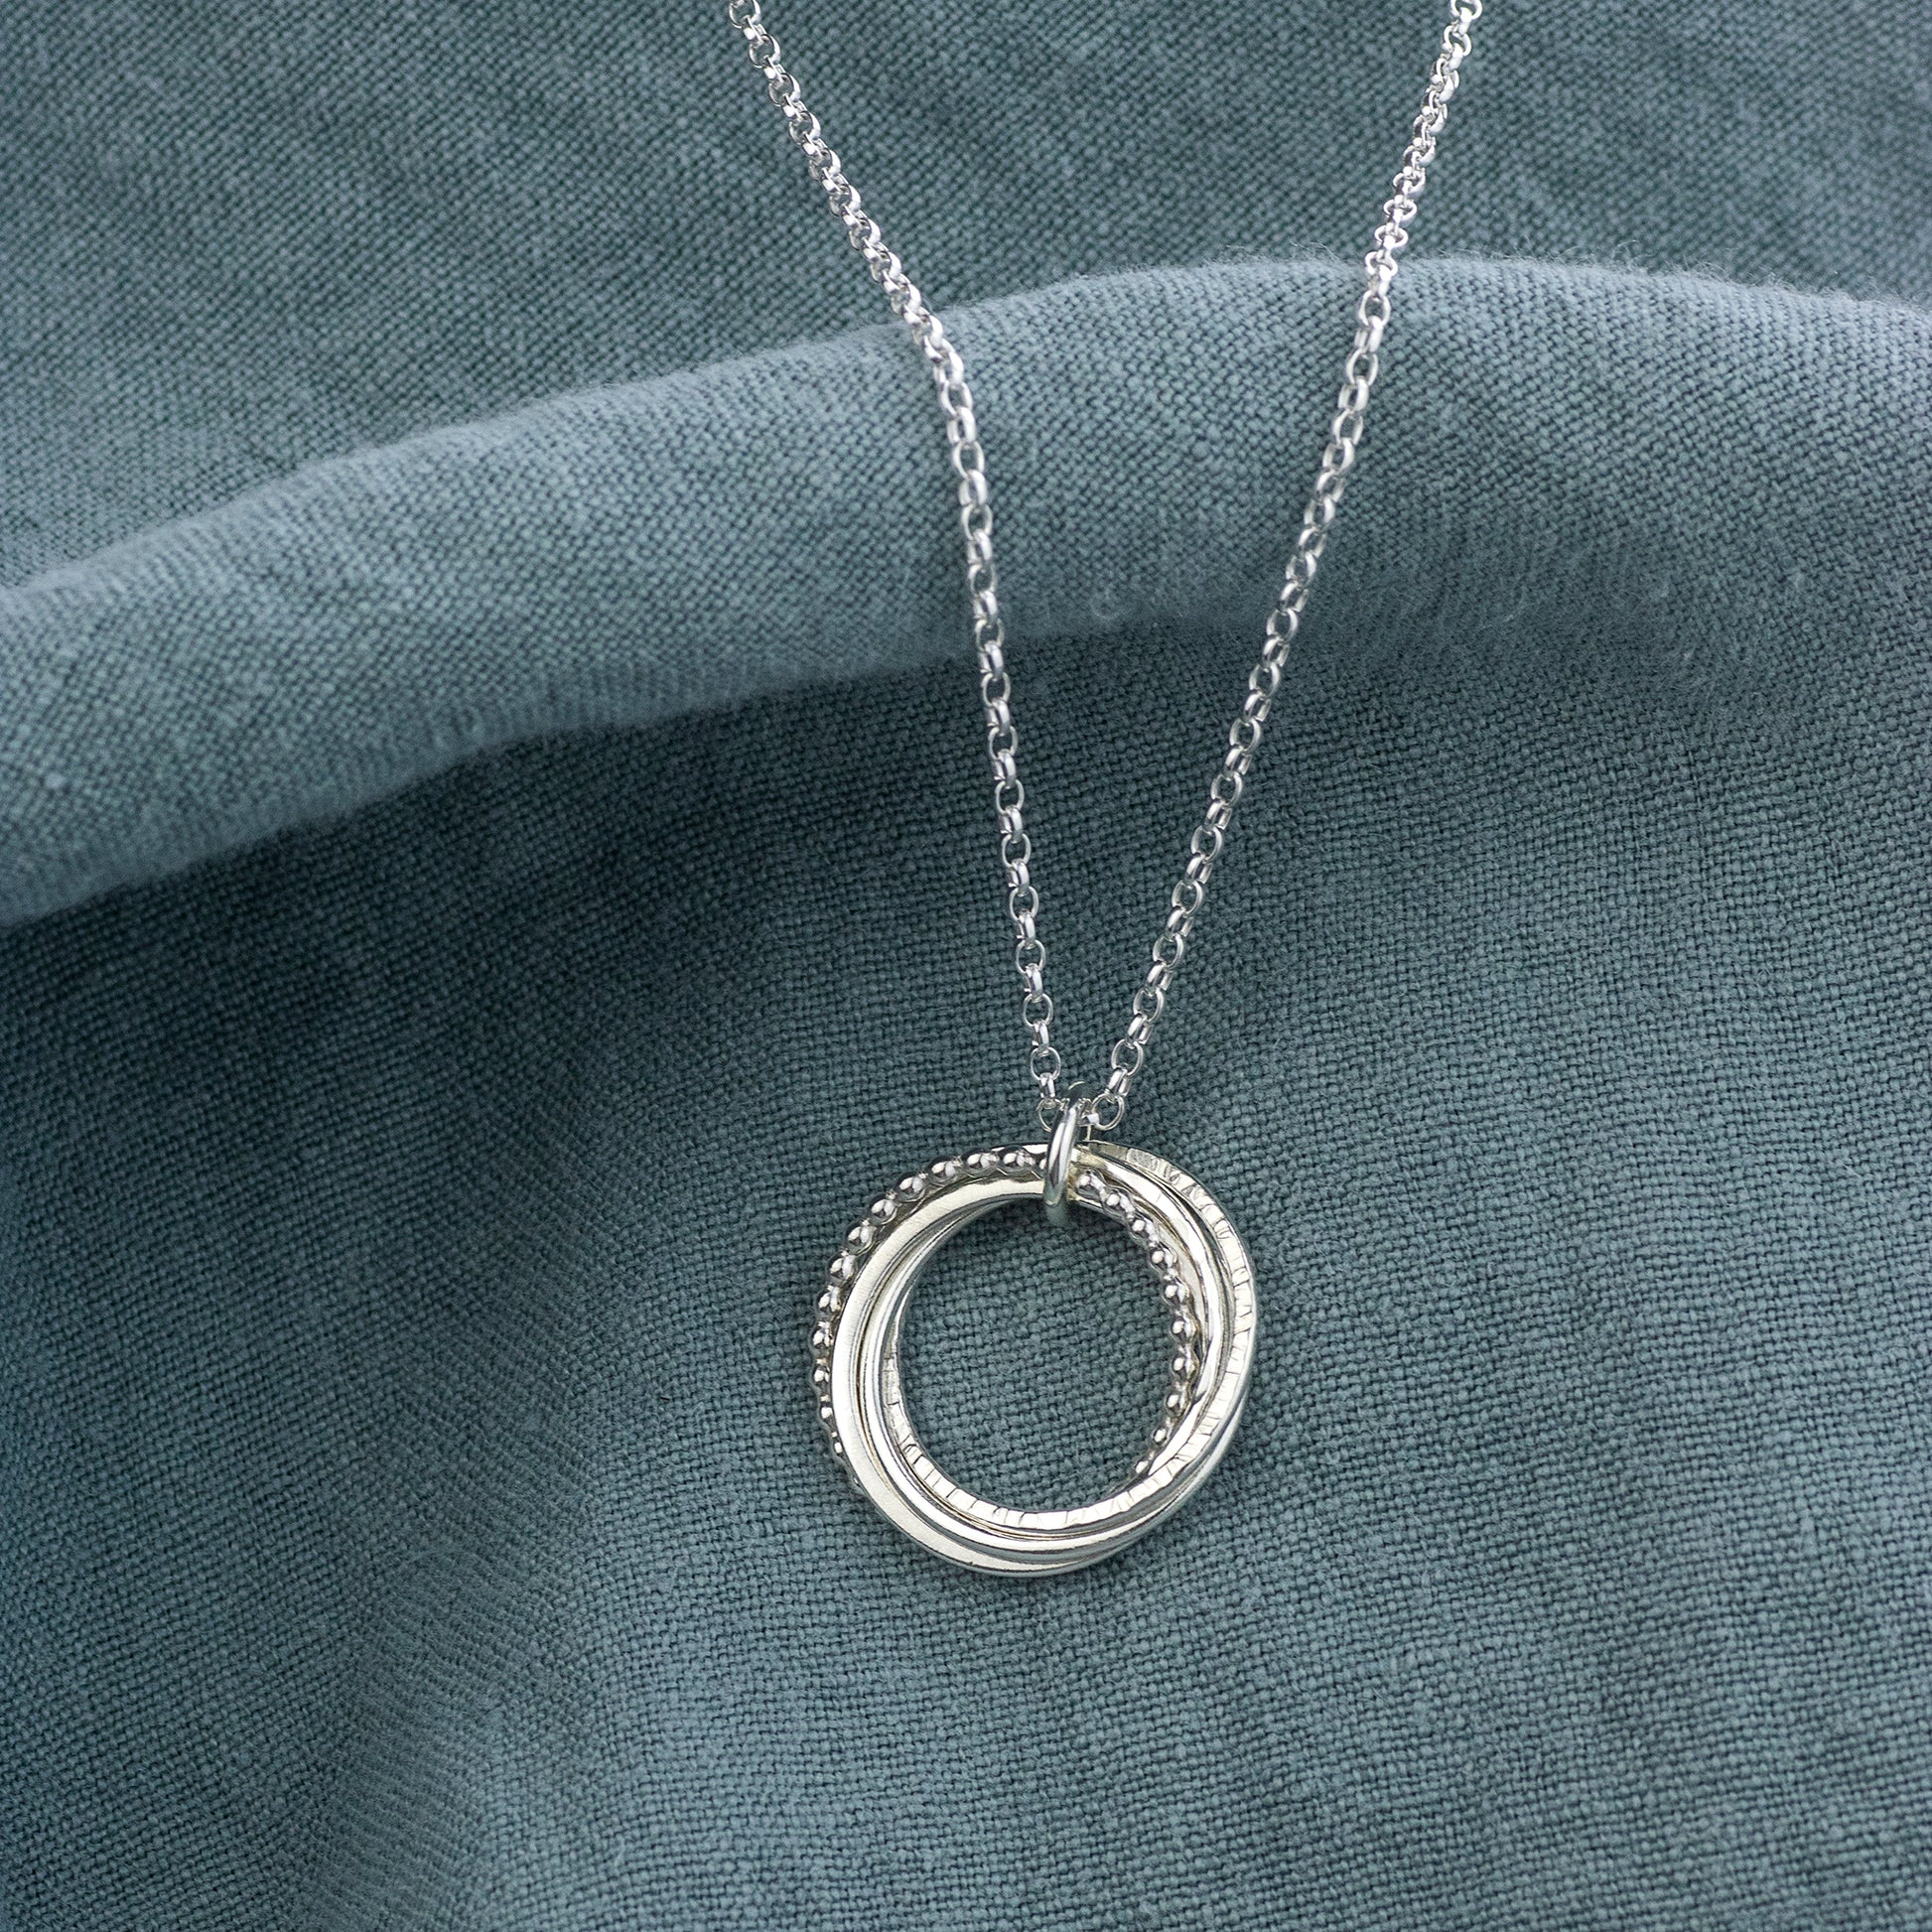 5th Anniversary Necklace - The Original 5 Rings for 5 Years Necklace - Silver